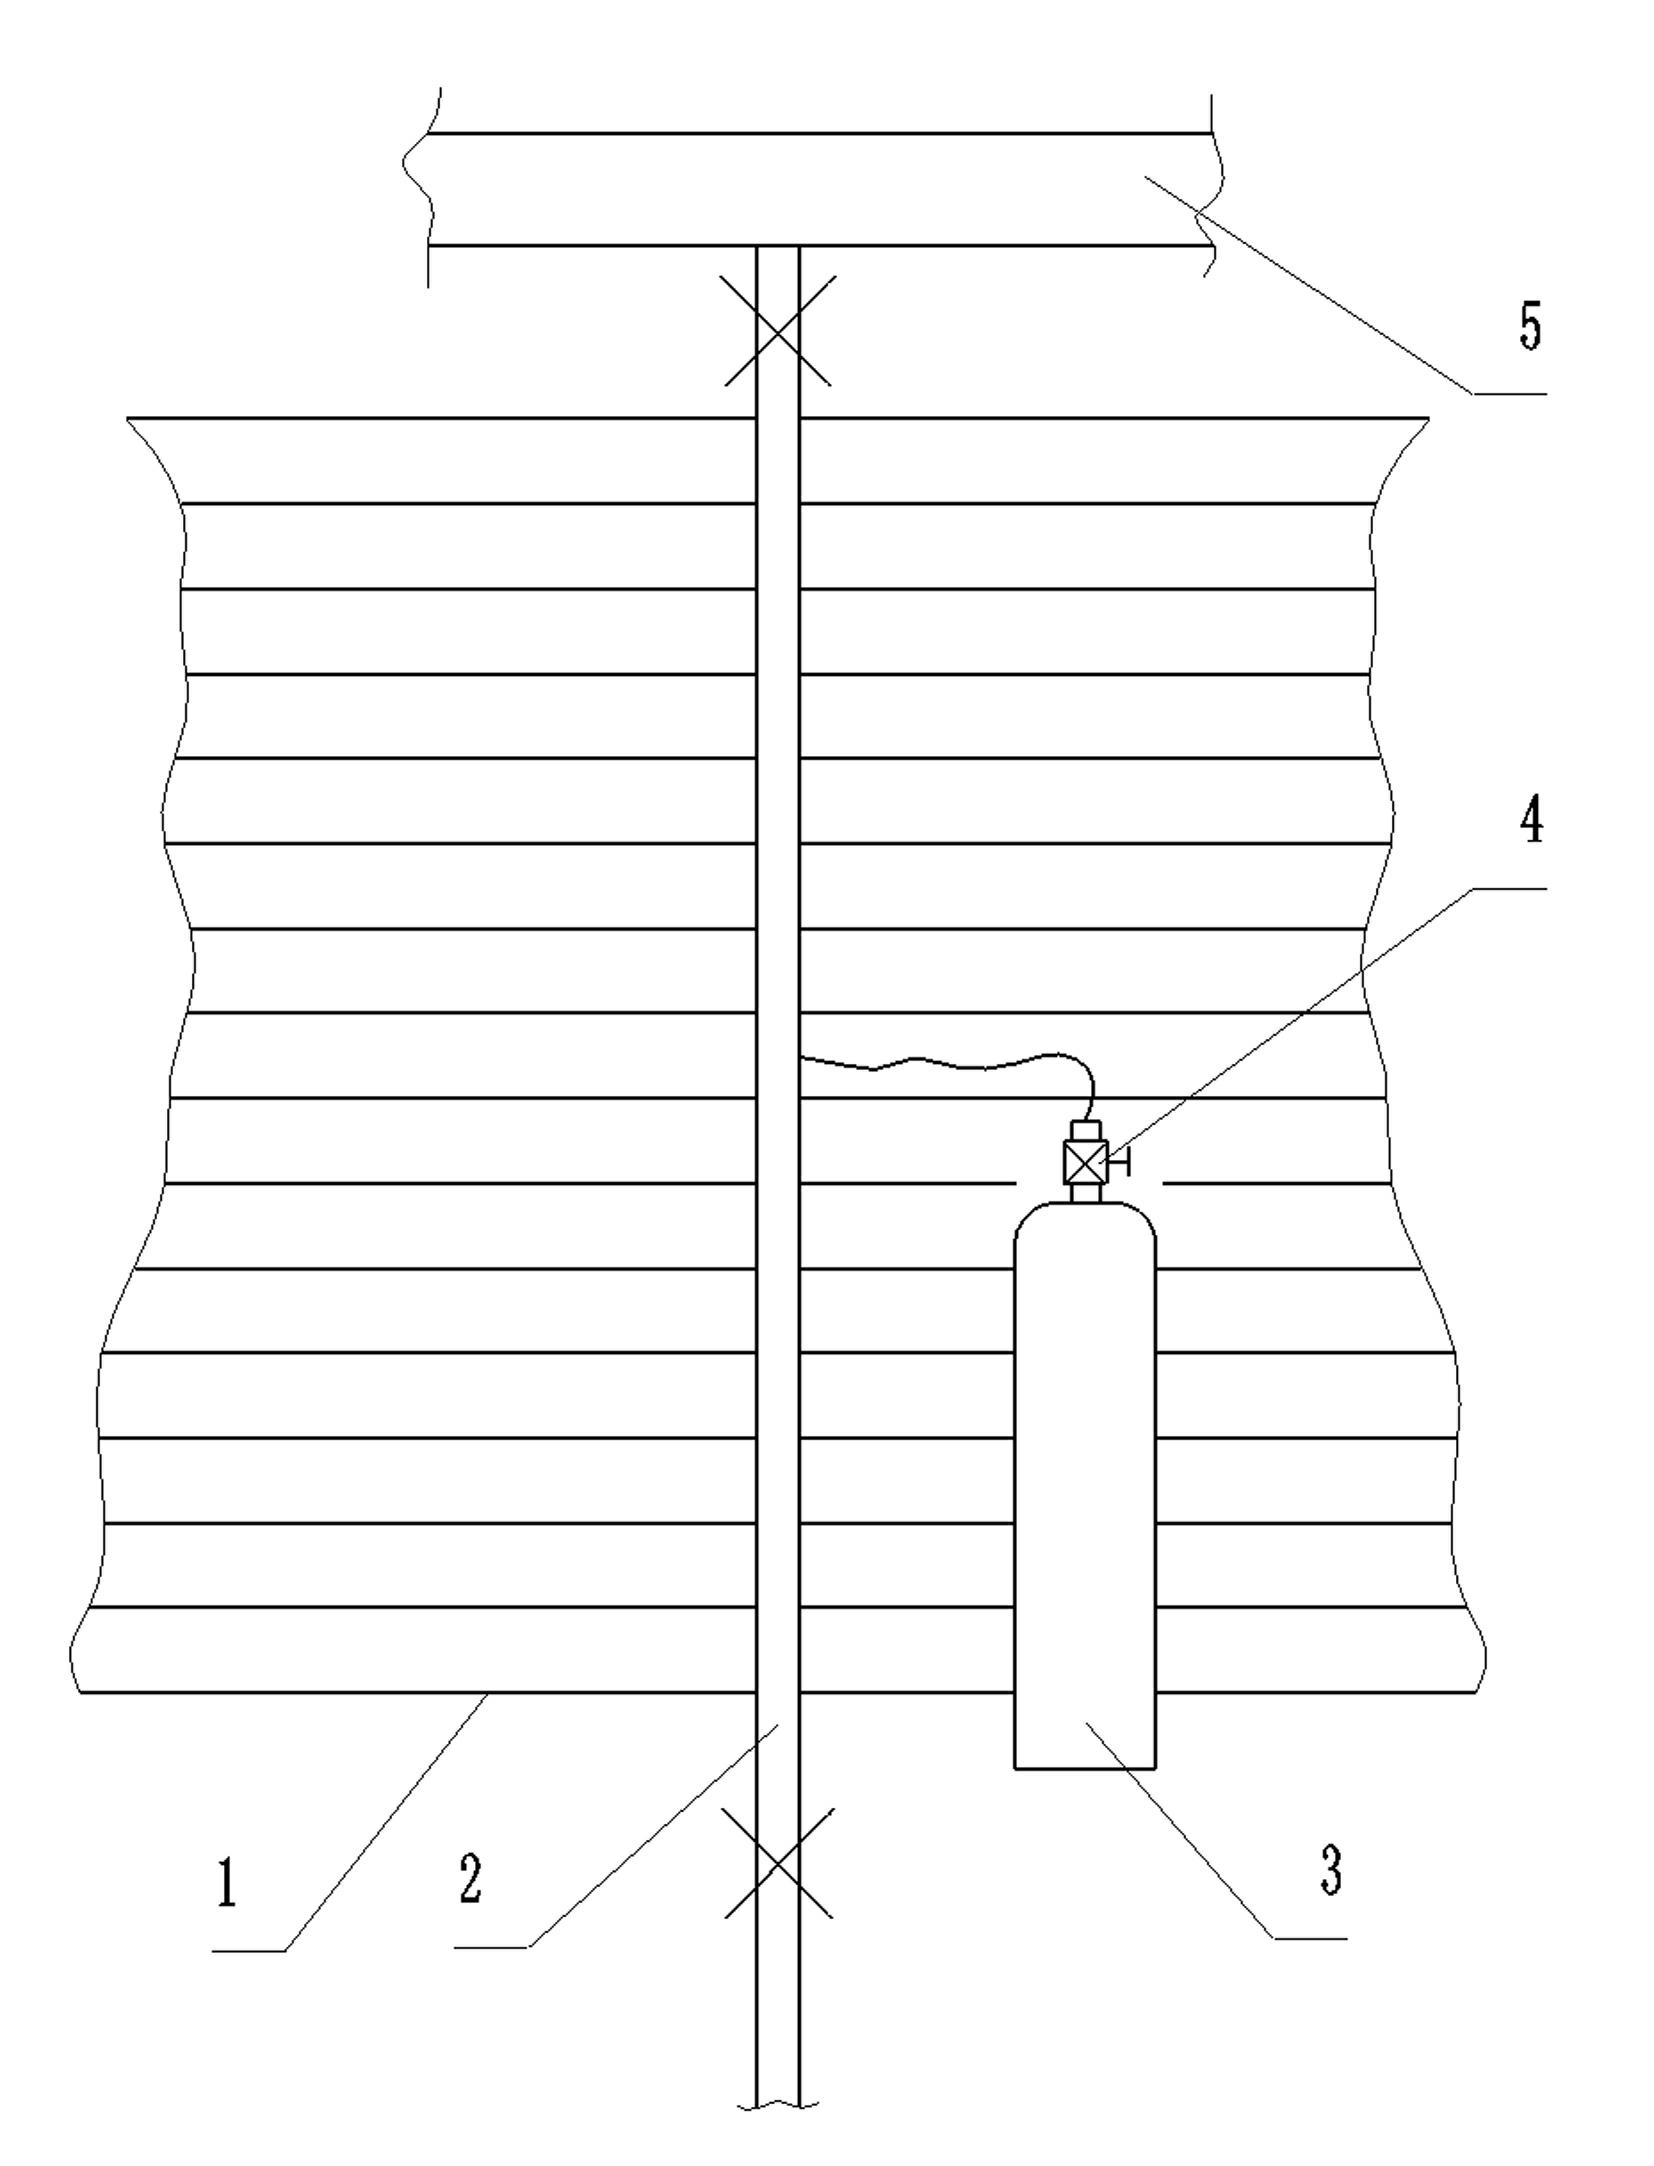 Method for applying carbon dioxide by use of farmland micro-irrigation system